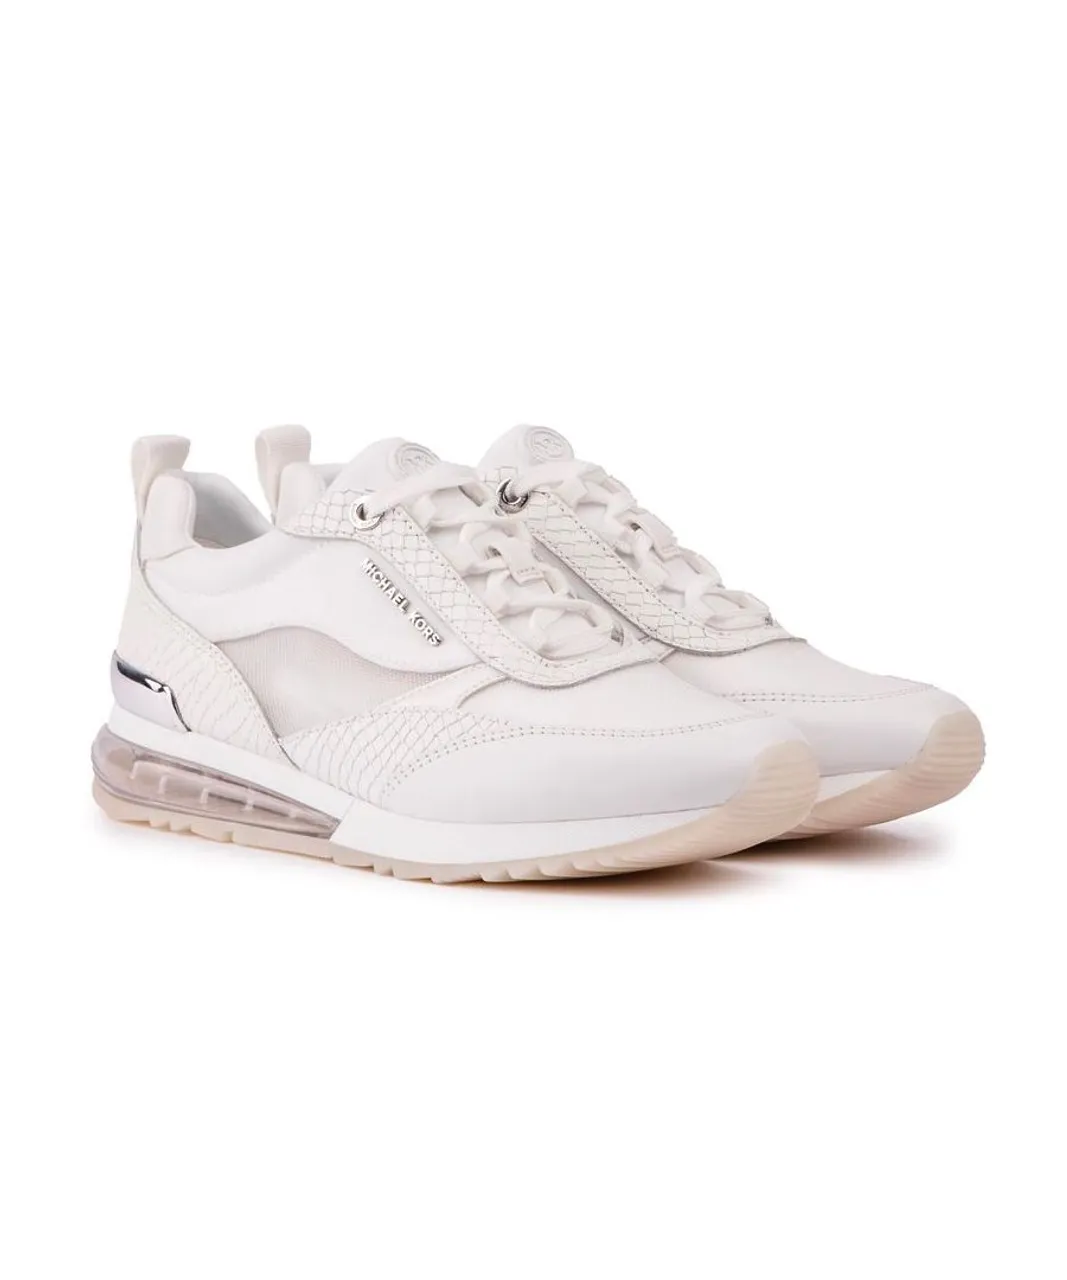 Michael Kors Womens Allie Stride Extreme Trainers - White Leather